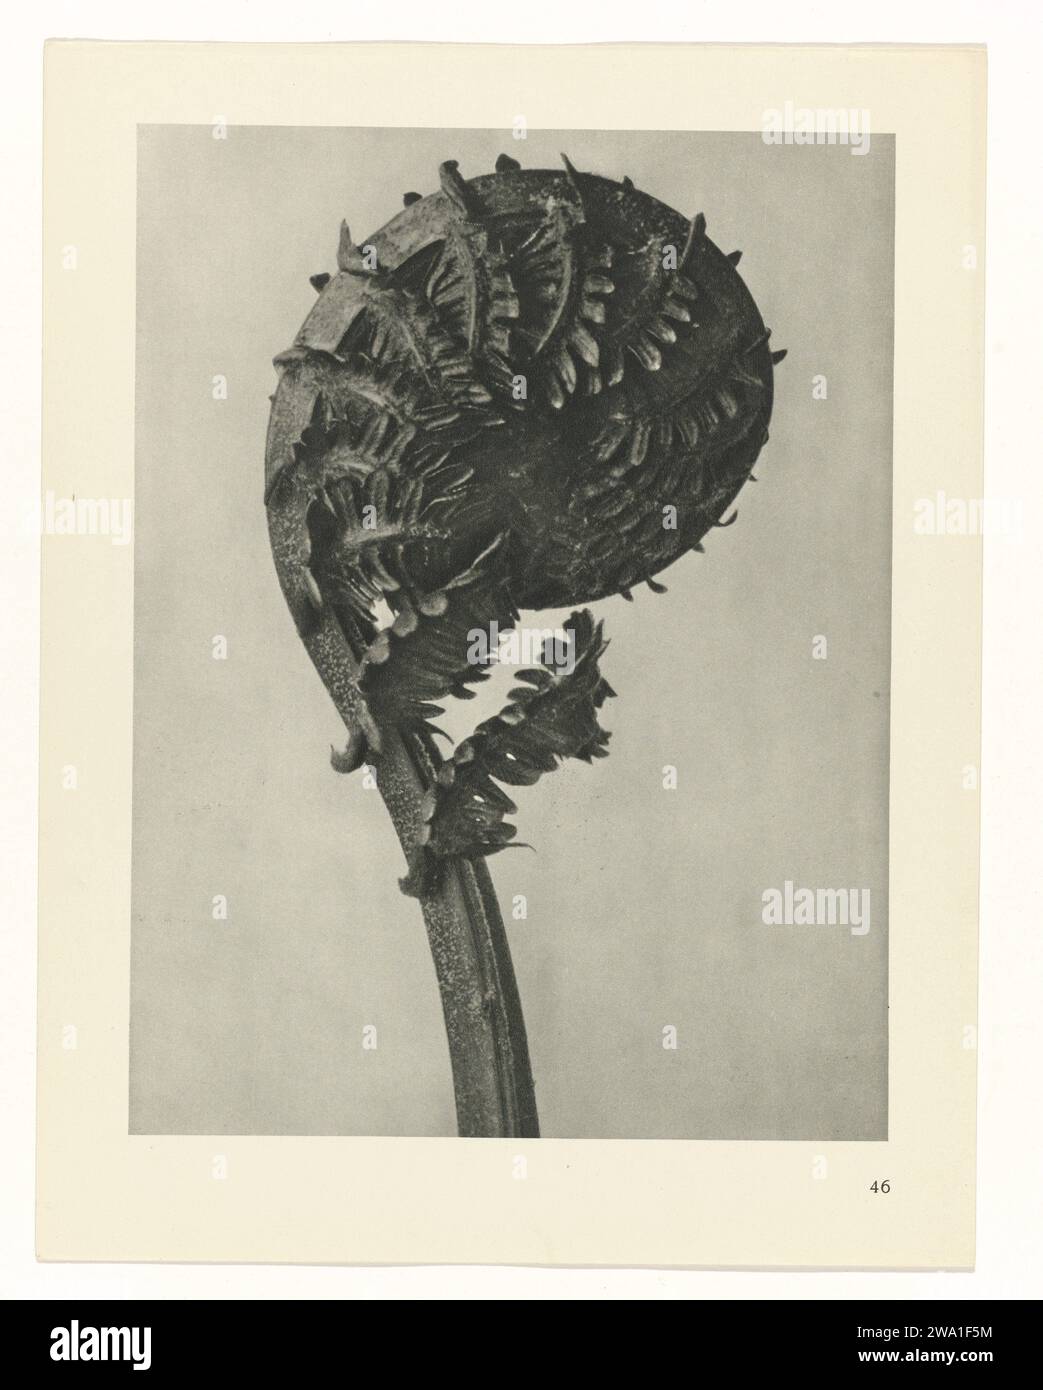 Plant Study, 1928 photograph Fach enlargement. Afkomstig uit losblady uitgave. Berlin paper. ink  plants (in general) Stock Photo